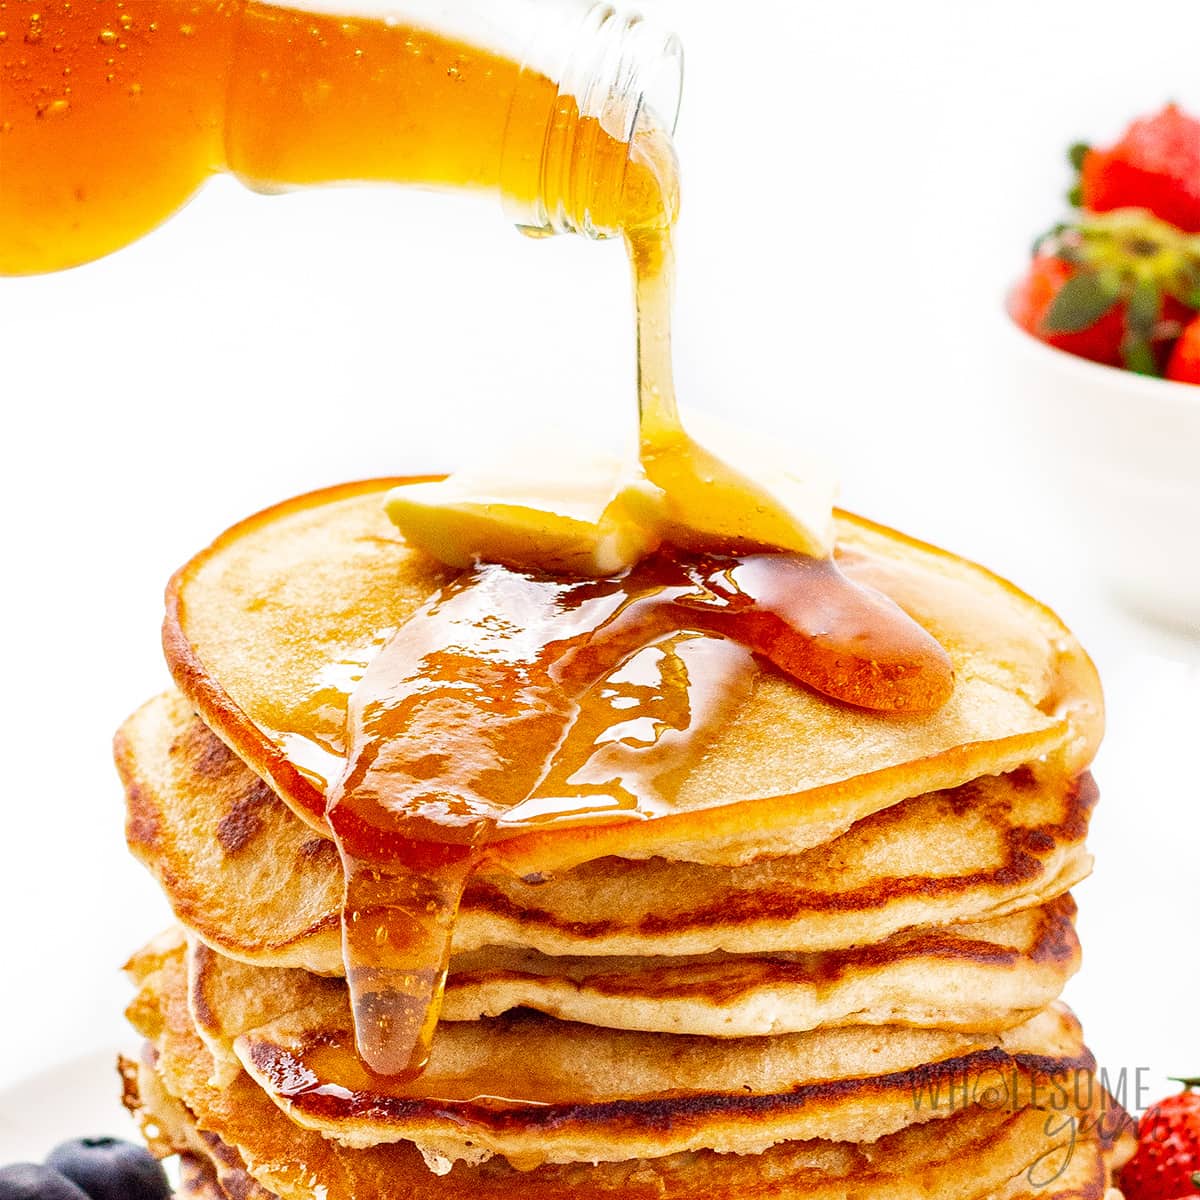 Keto sugar free maple syrup pouring onto stack of pancakes.